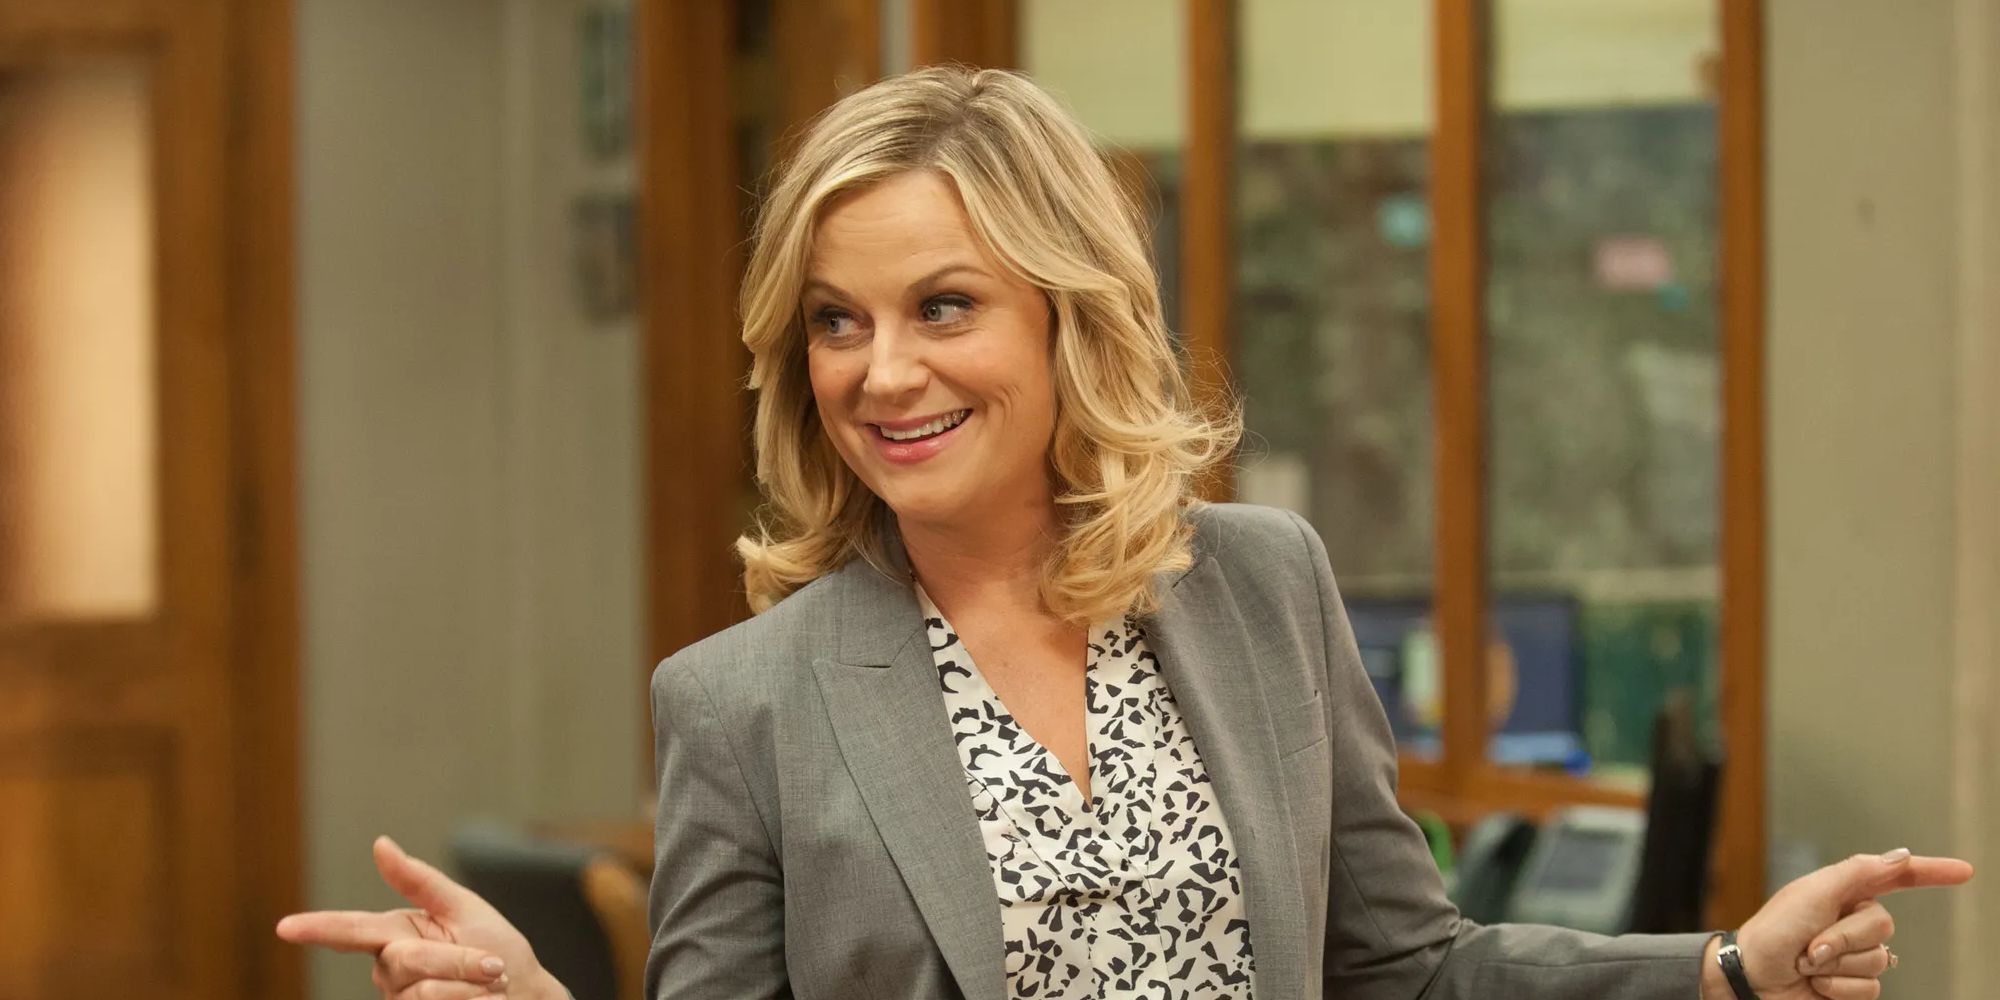 Amy Poehler as Leslie Knope in Parks and Rec